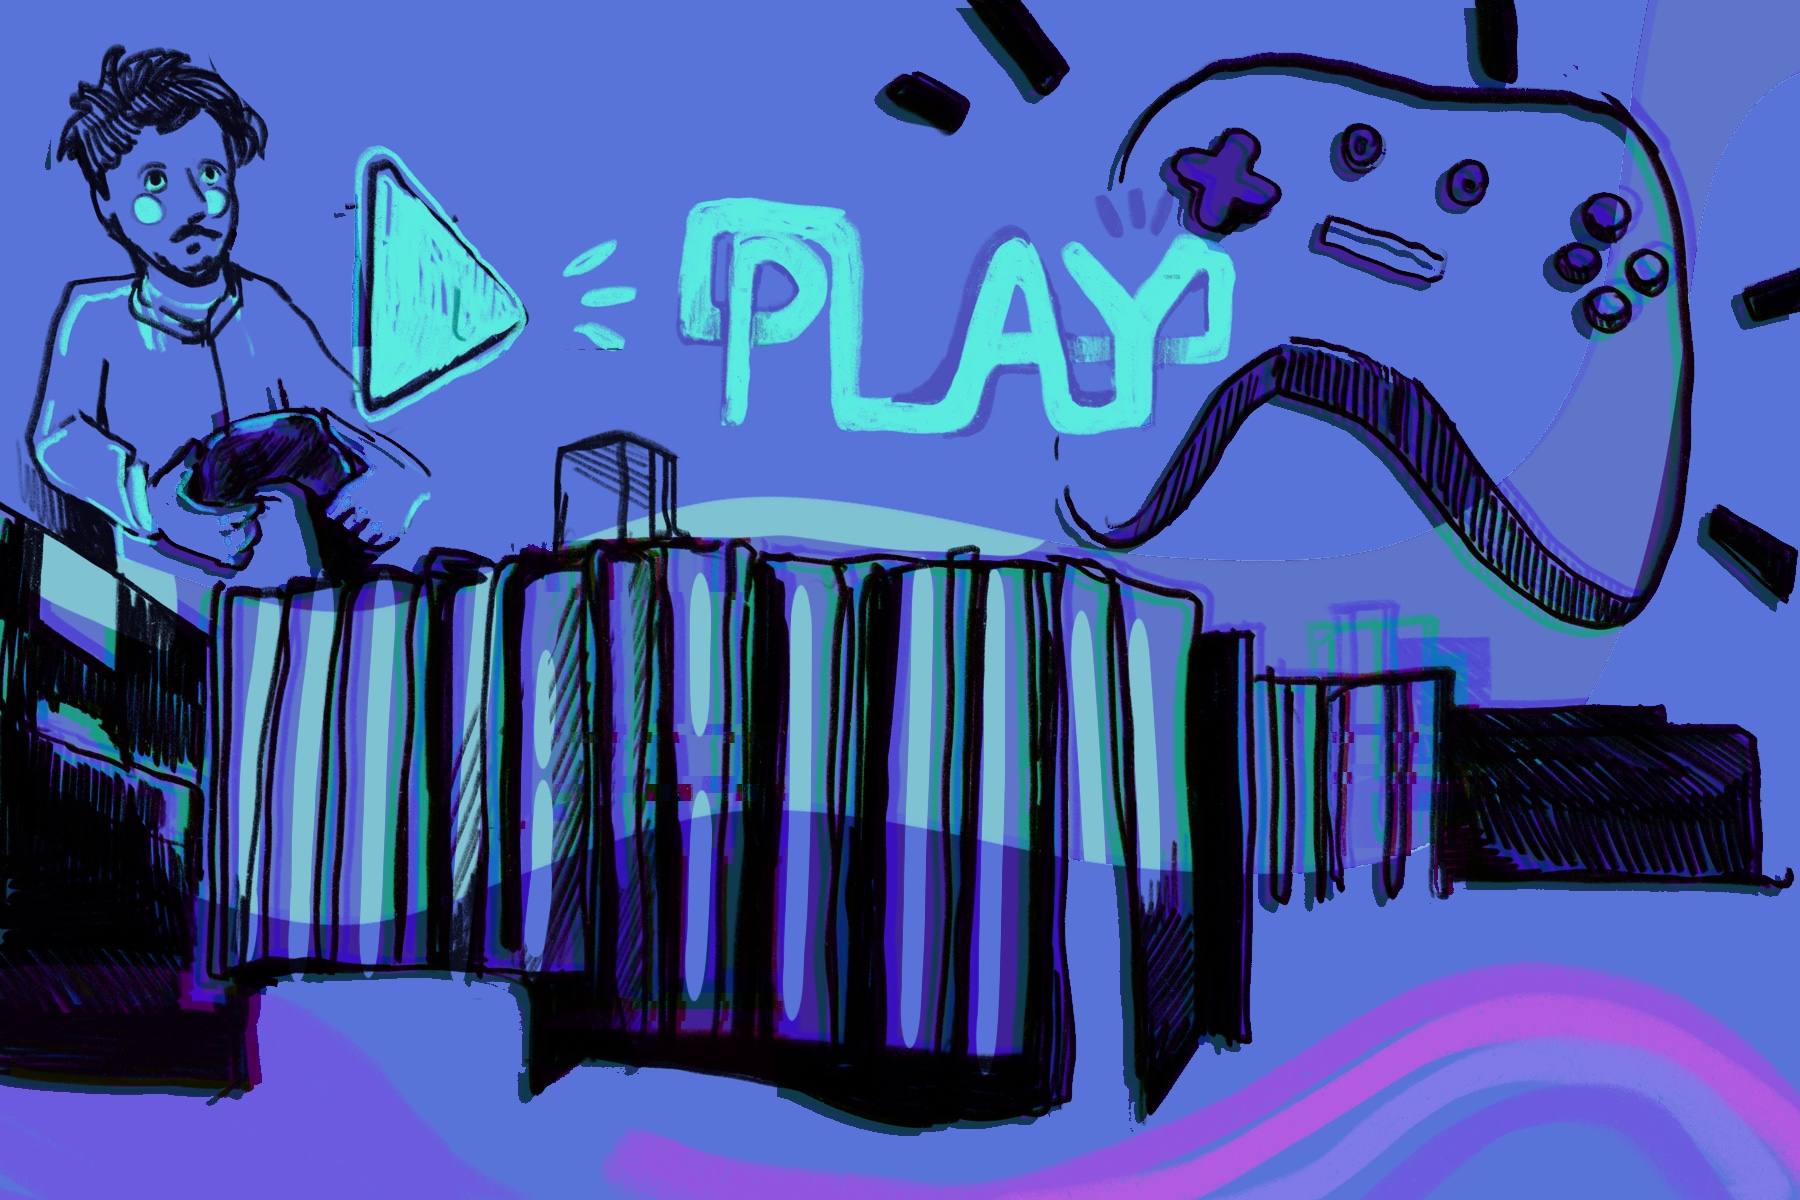 Someone playing a video game, is holding a controller. The word play in neon blue is visible in the middle of the graphic beside a giant controller.